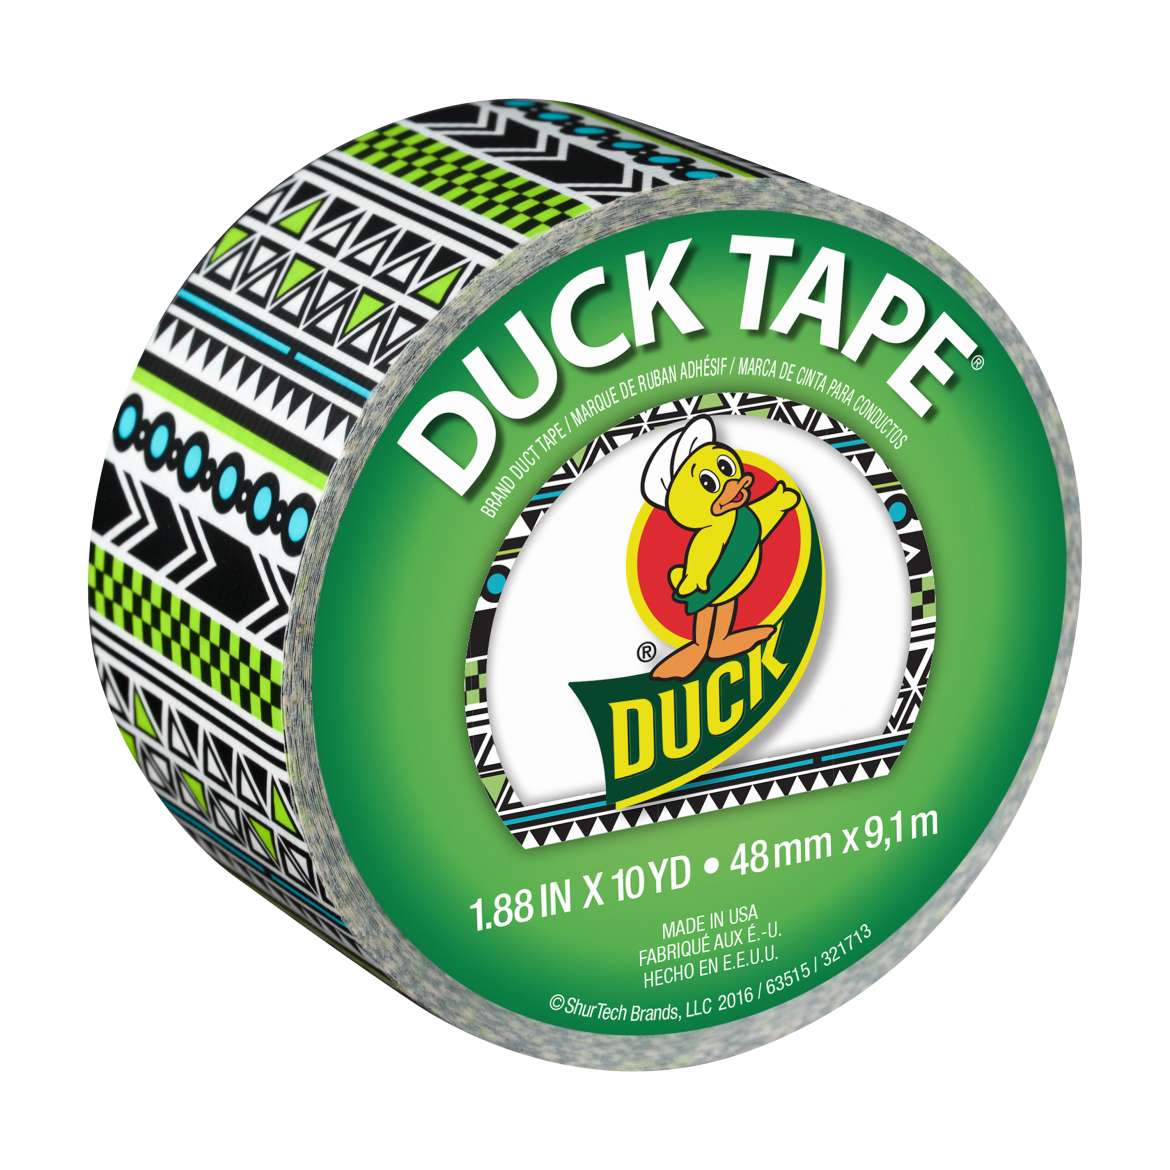 Printed Duck Tape® Brand Duct Tape - Tribal, 1.88 in. x 10 yd.